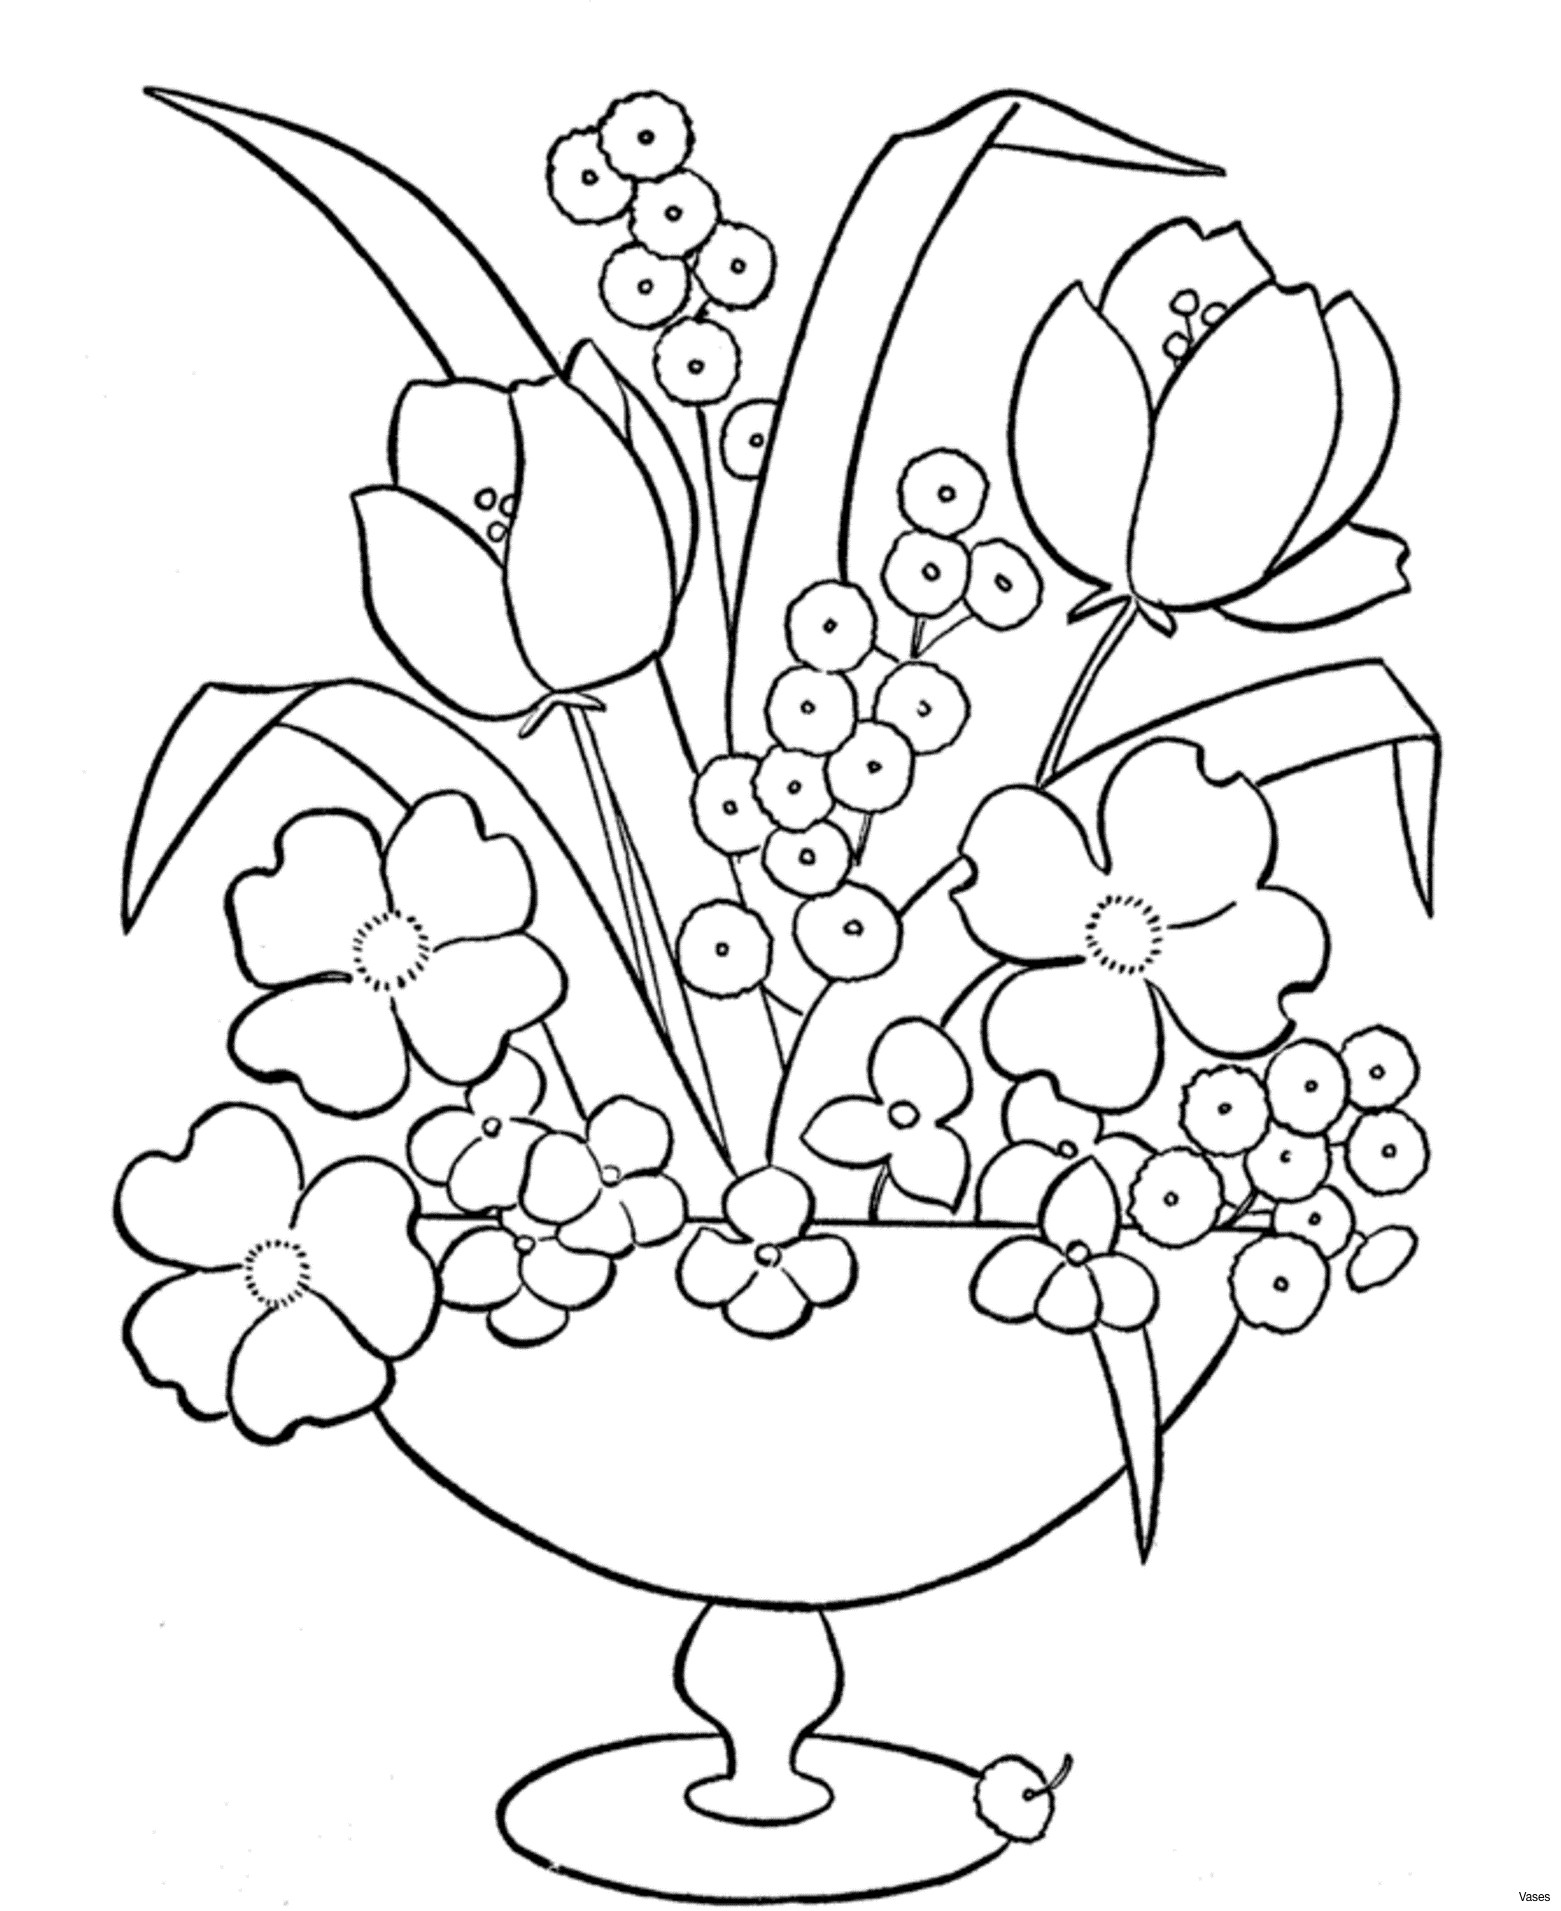 Flower Vase Photos Of Cool Vases Flower Vase Coloring Page Pages Flowers In A top I 0d Ruva for Cool Vases Flower Vase Coloring Page Pages Flowers In A top I 0d